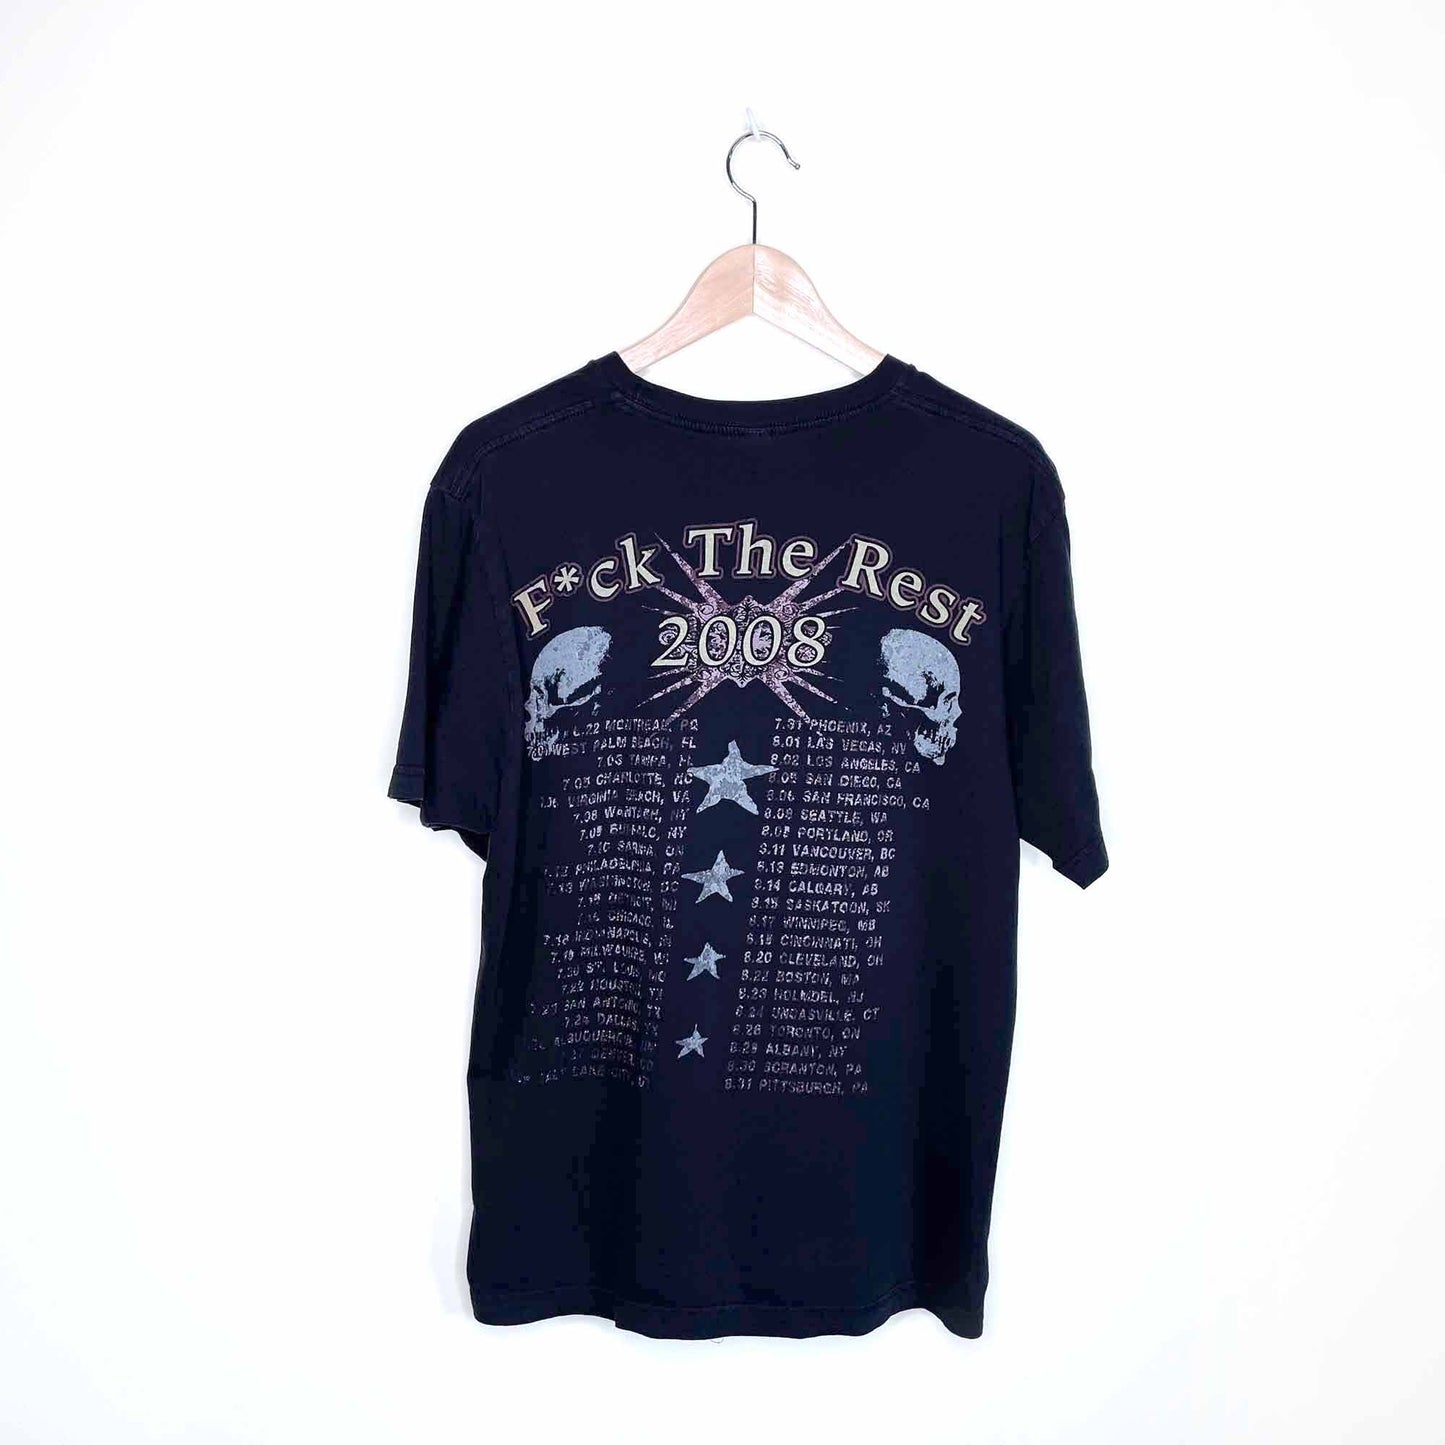 motley crue 2008 f*ck the rest tour band tee - size large